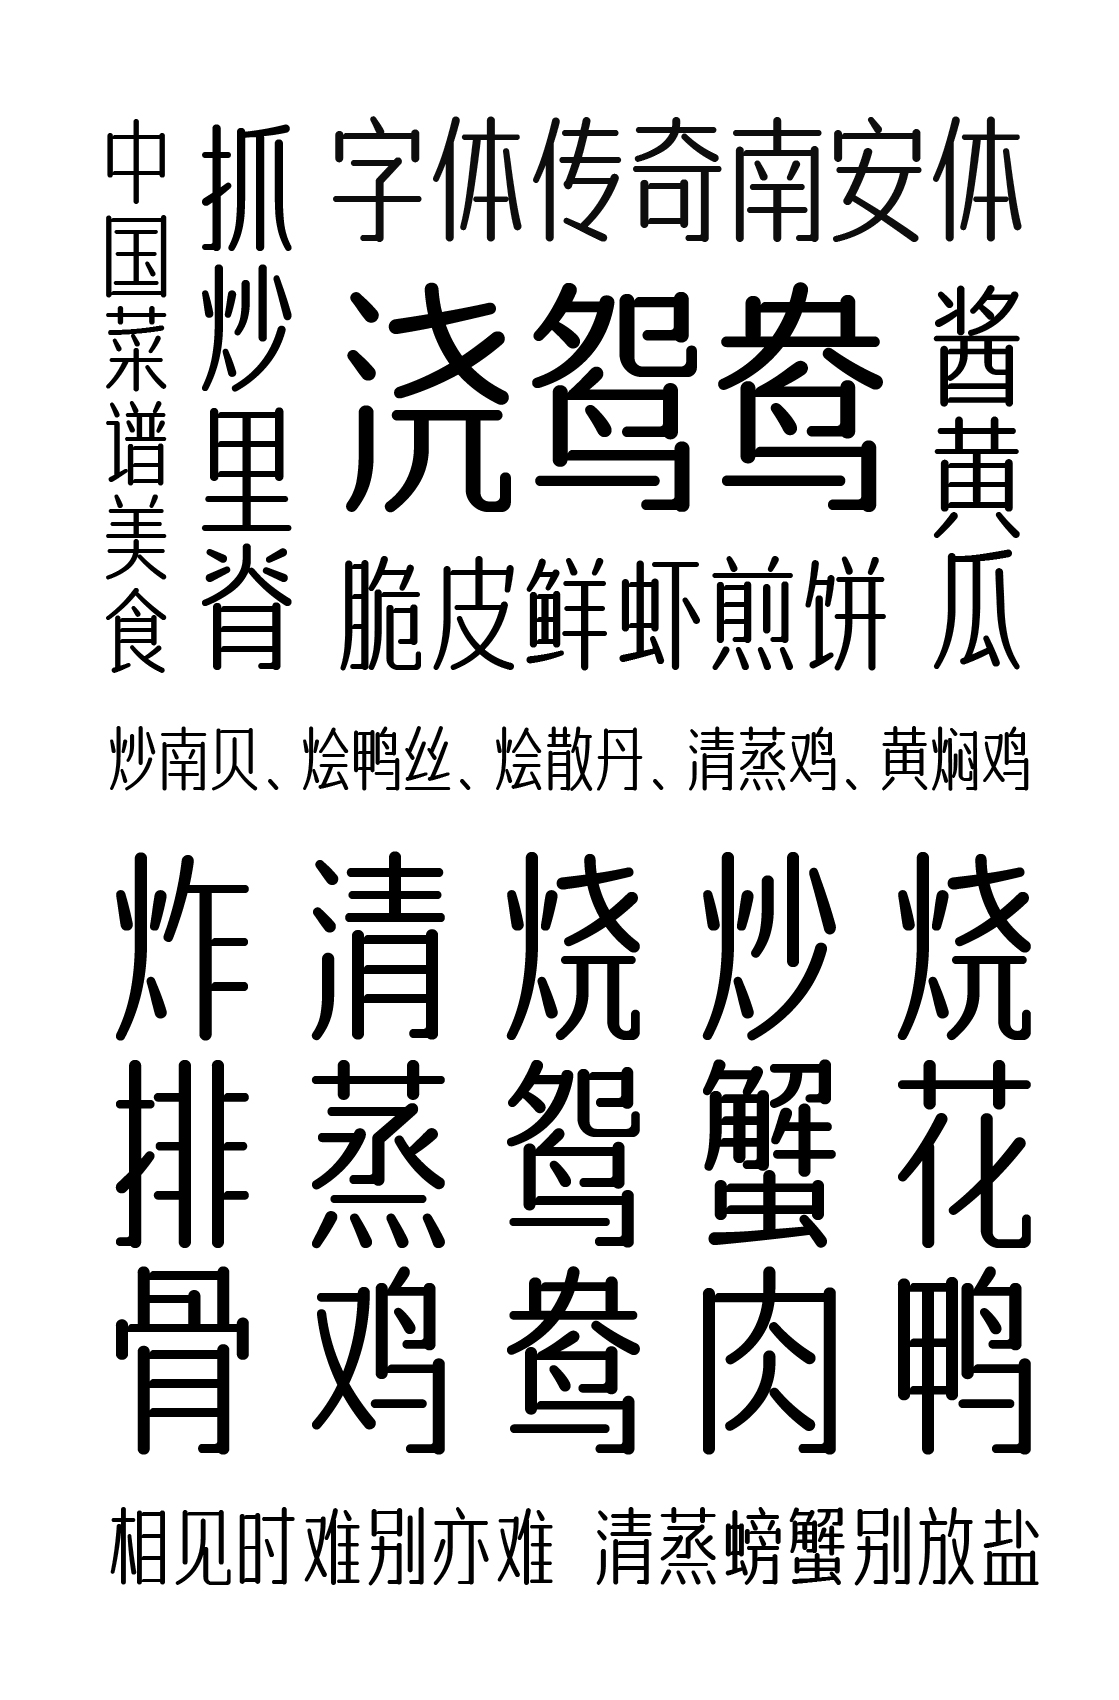 A font with round font design-legendary Nan 'an style